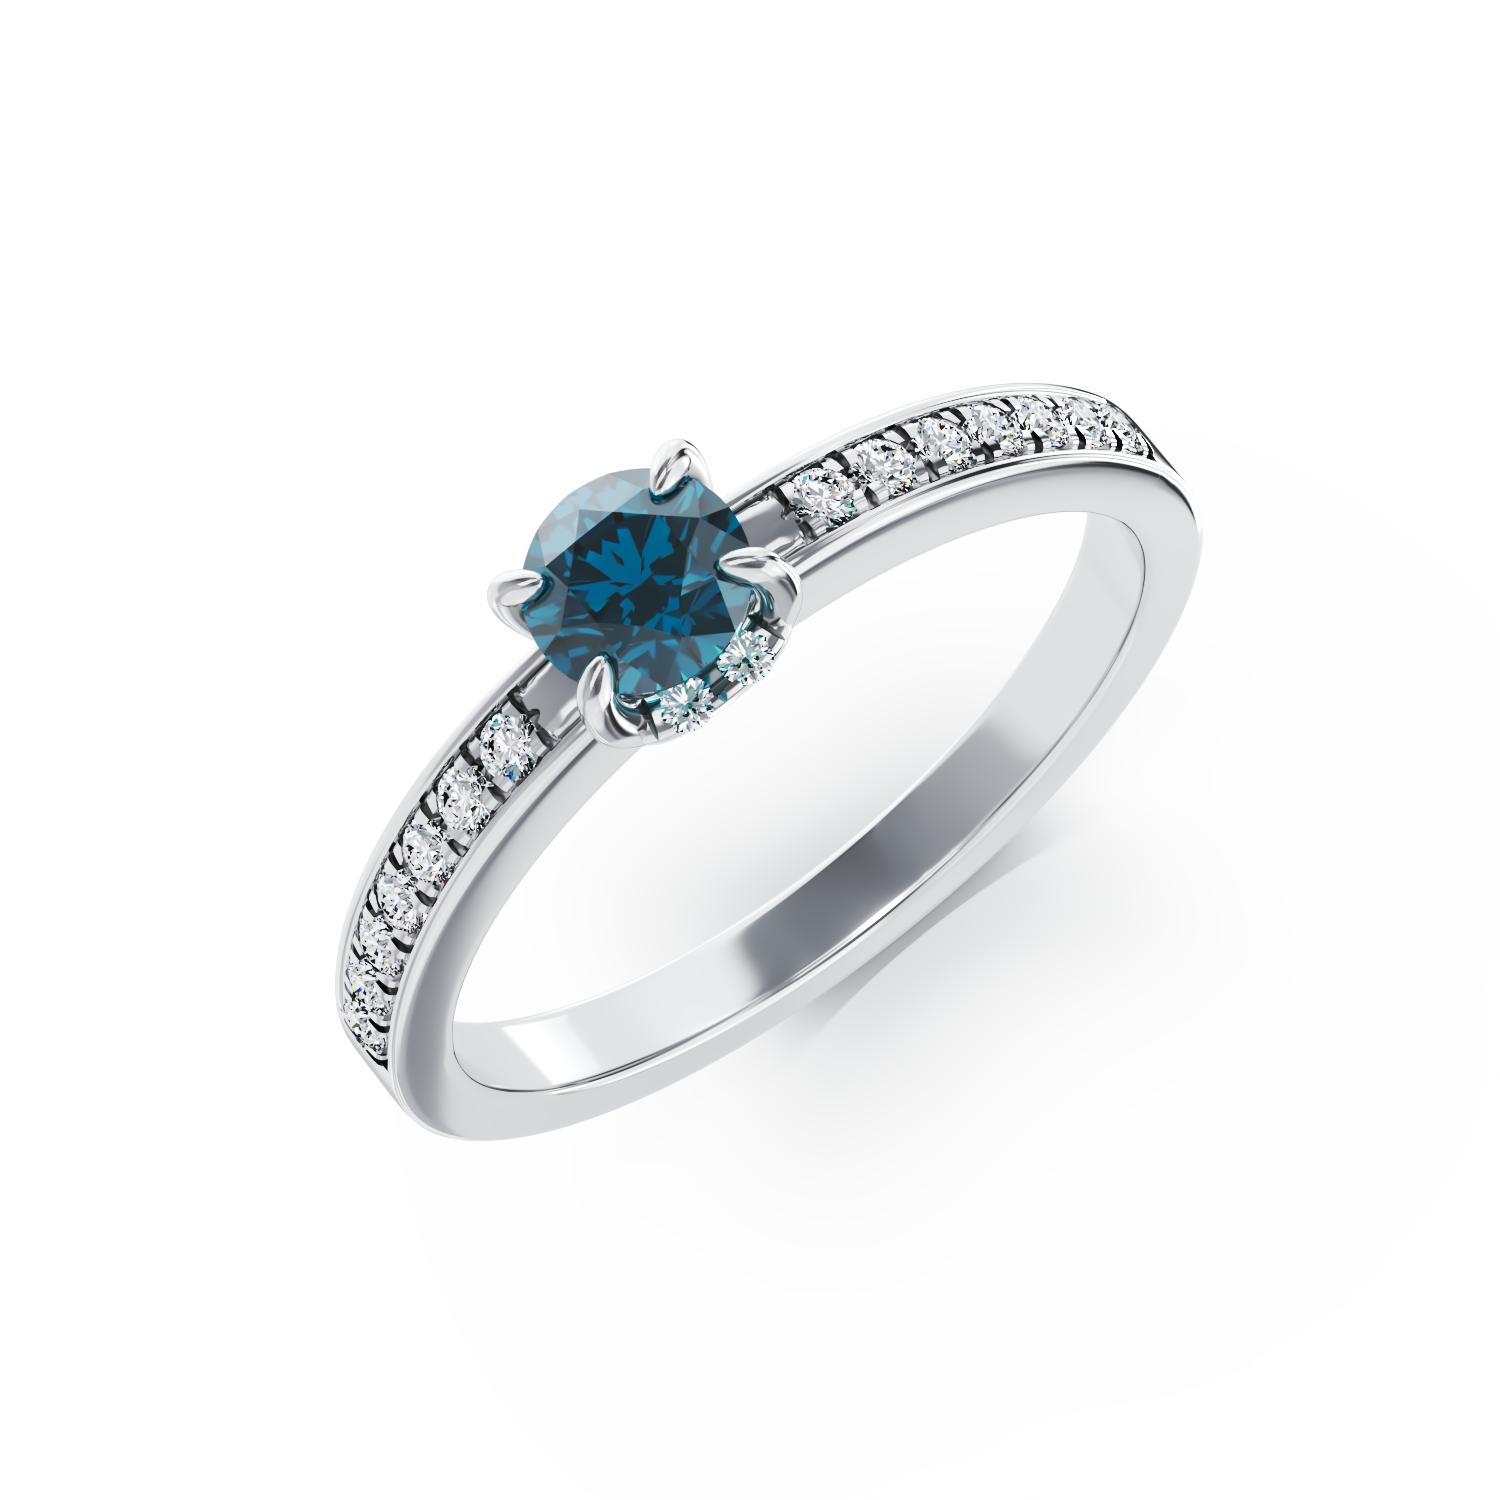 18K white gold engagement ring with 0.33ct blue diamond and 0.16ct diamonds